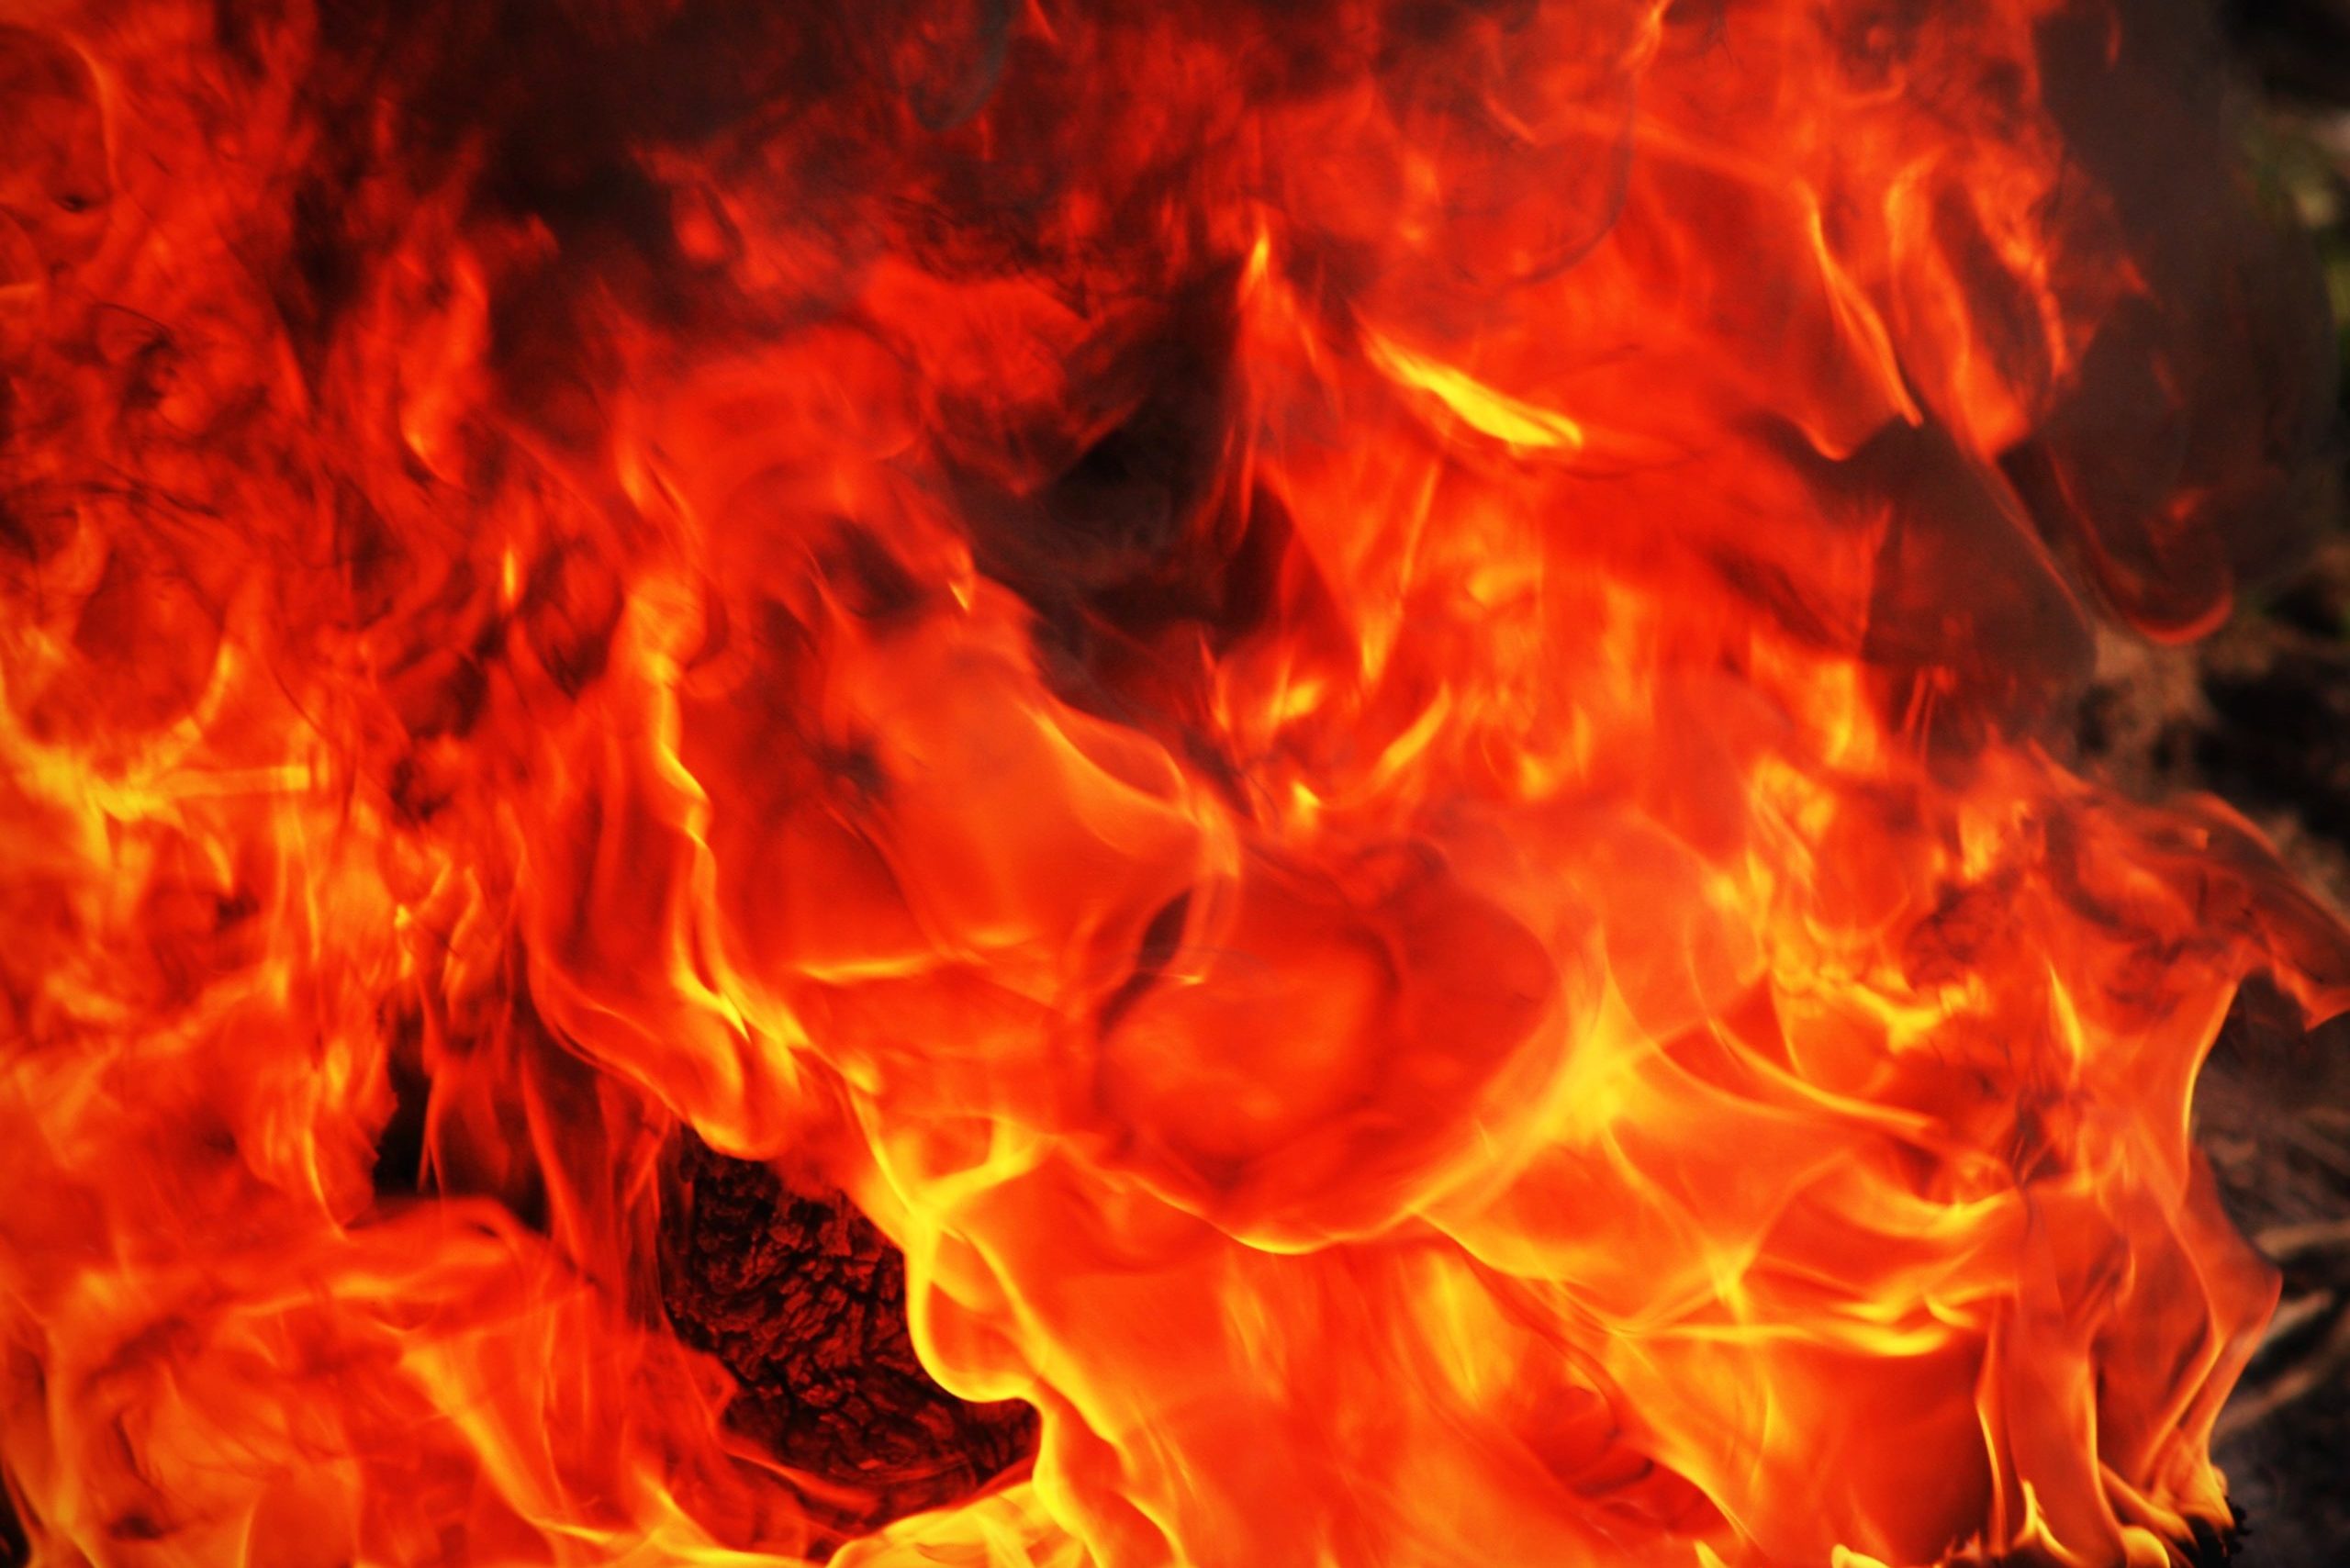 An image of a fire, wood burning